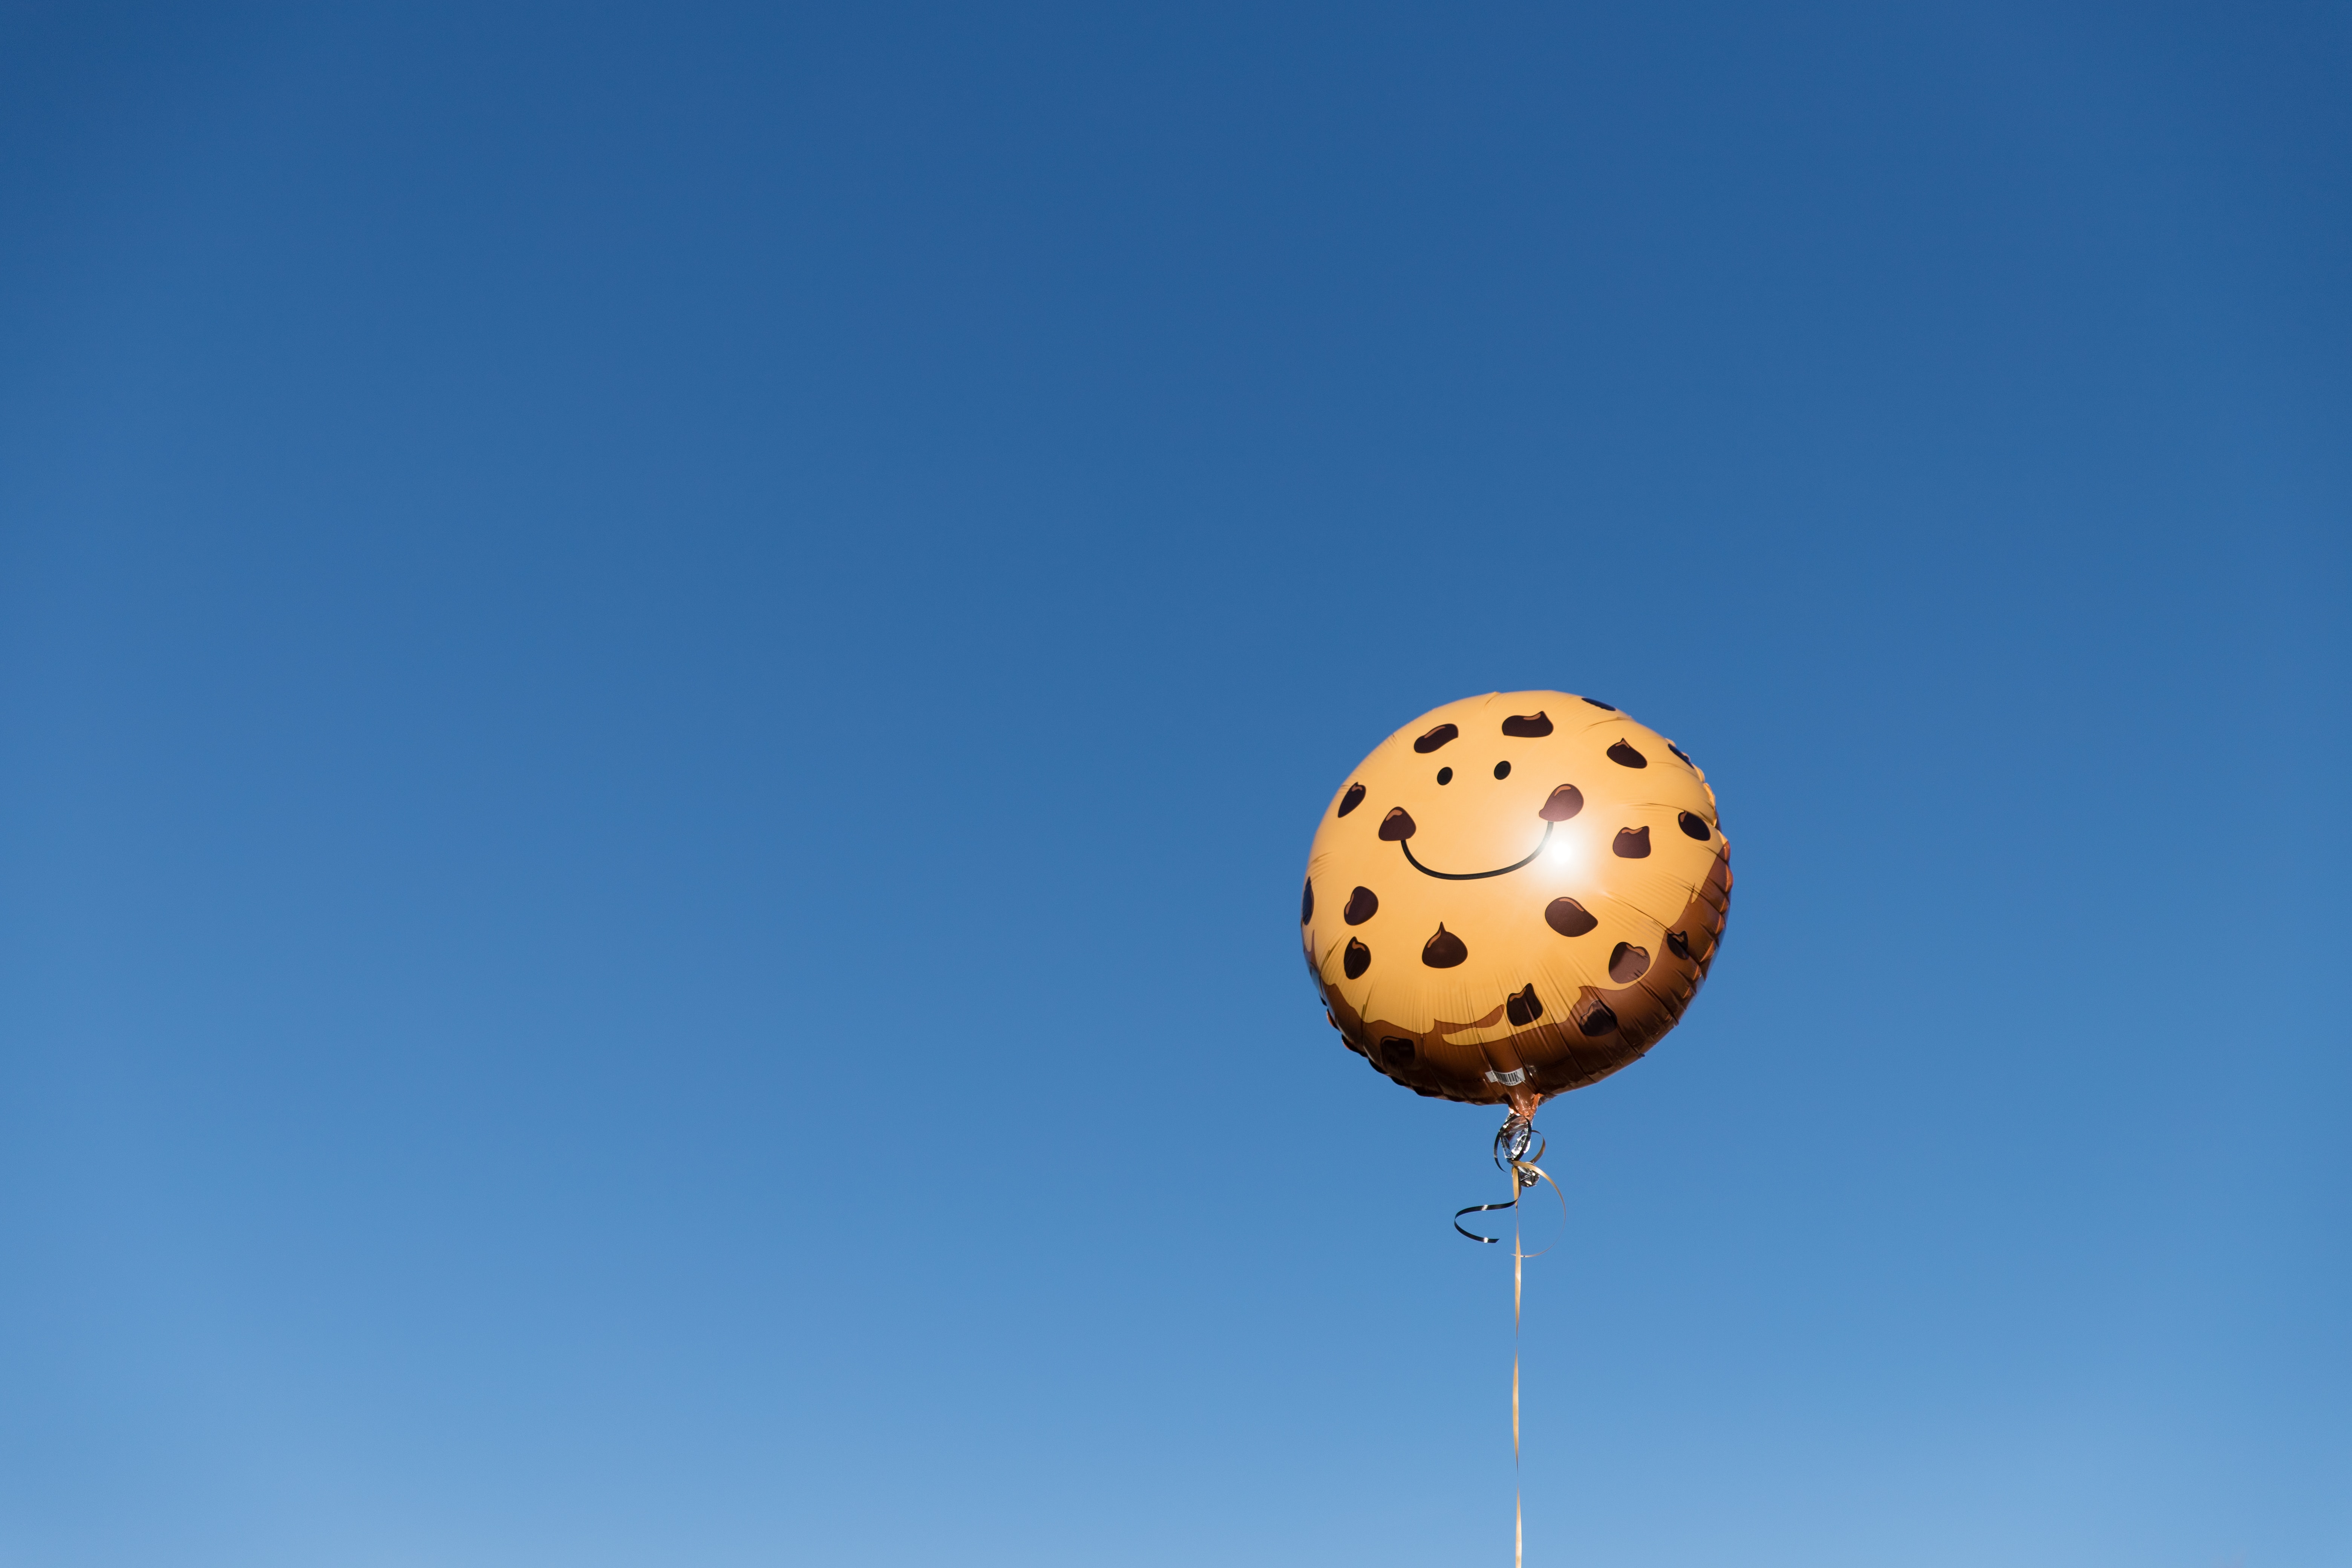 109401 download wallpaper sky, miscellanea, miscellaneous, balloon, smile, emoticon, smiley screensavers and pictures for free